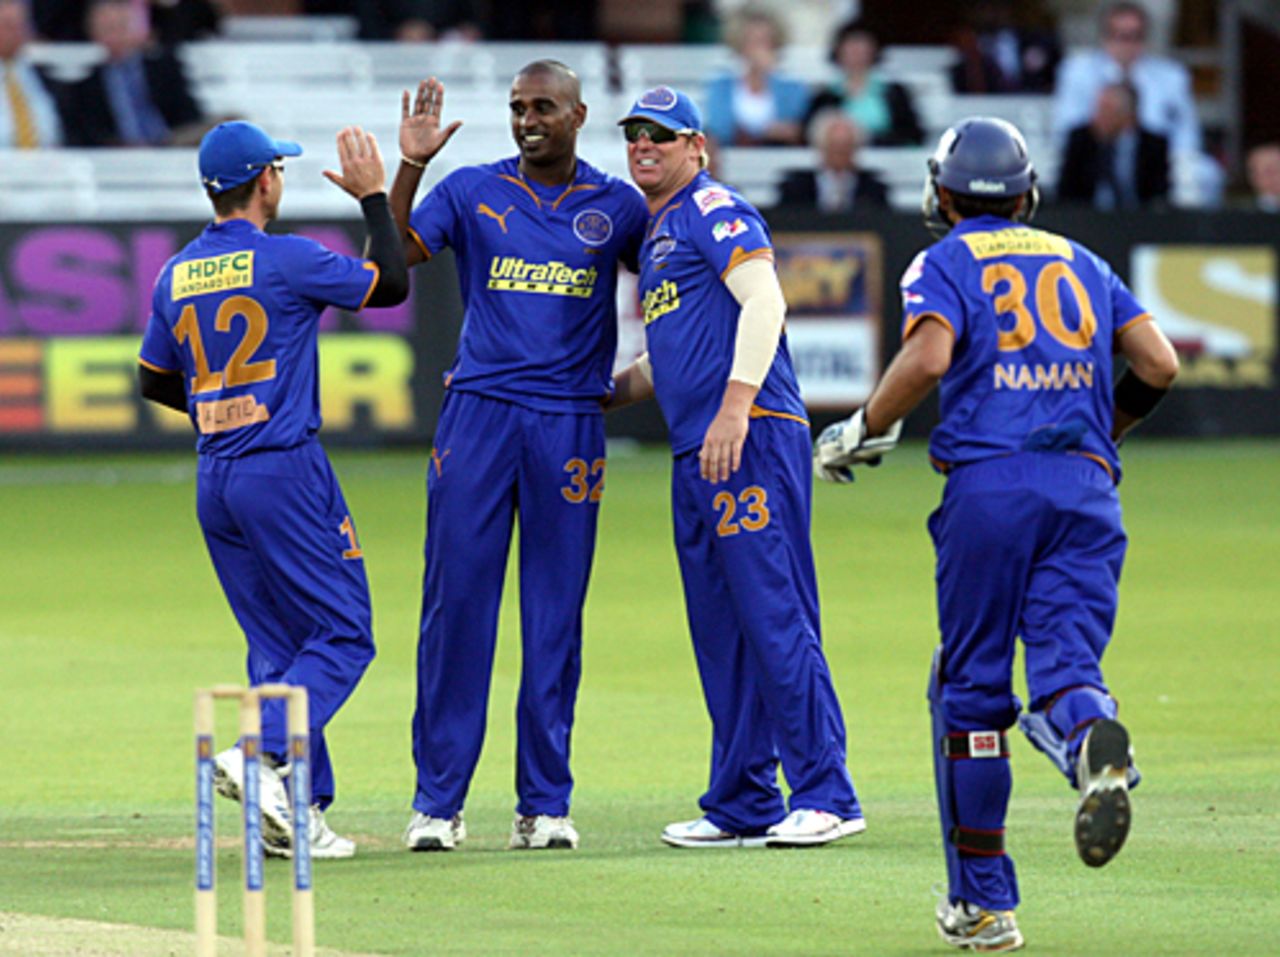 Team-mates congratulate Dimitri Mascarenhas after Neil Dexter's dismissal, Middlesex v Rajasthan Royals, British Asian Cup, Lord's, July 6, 2009